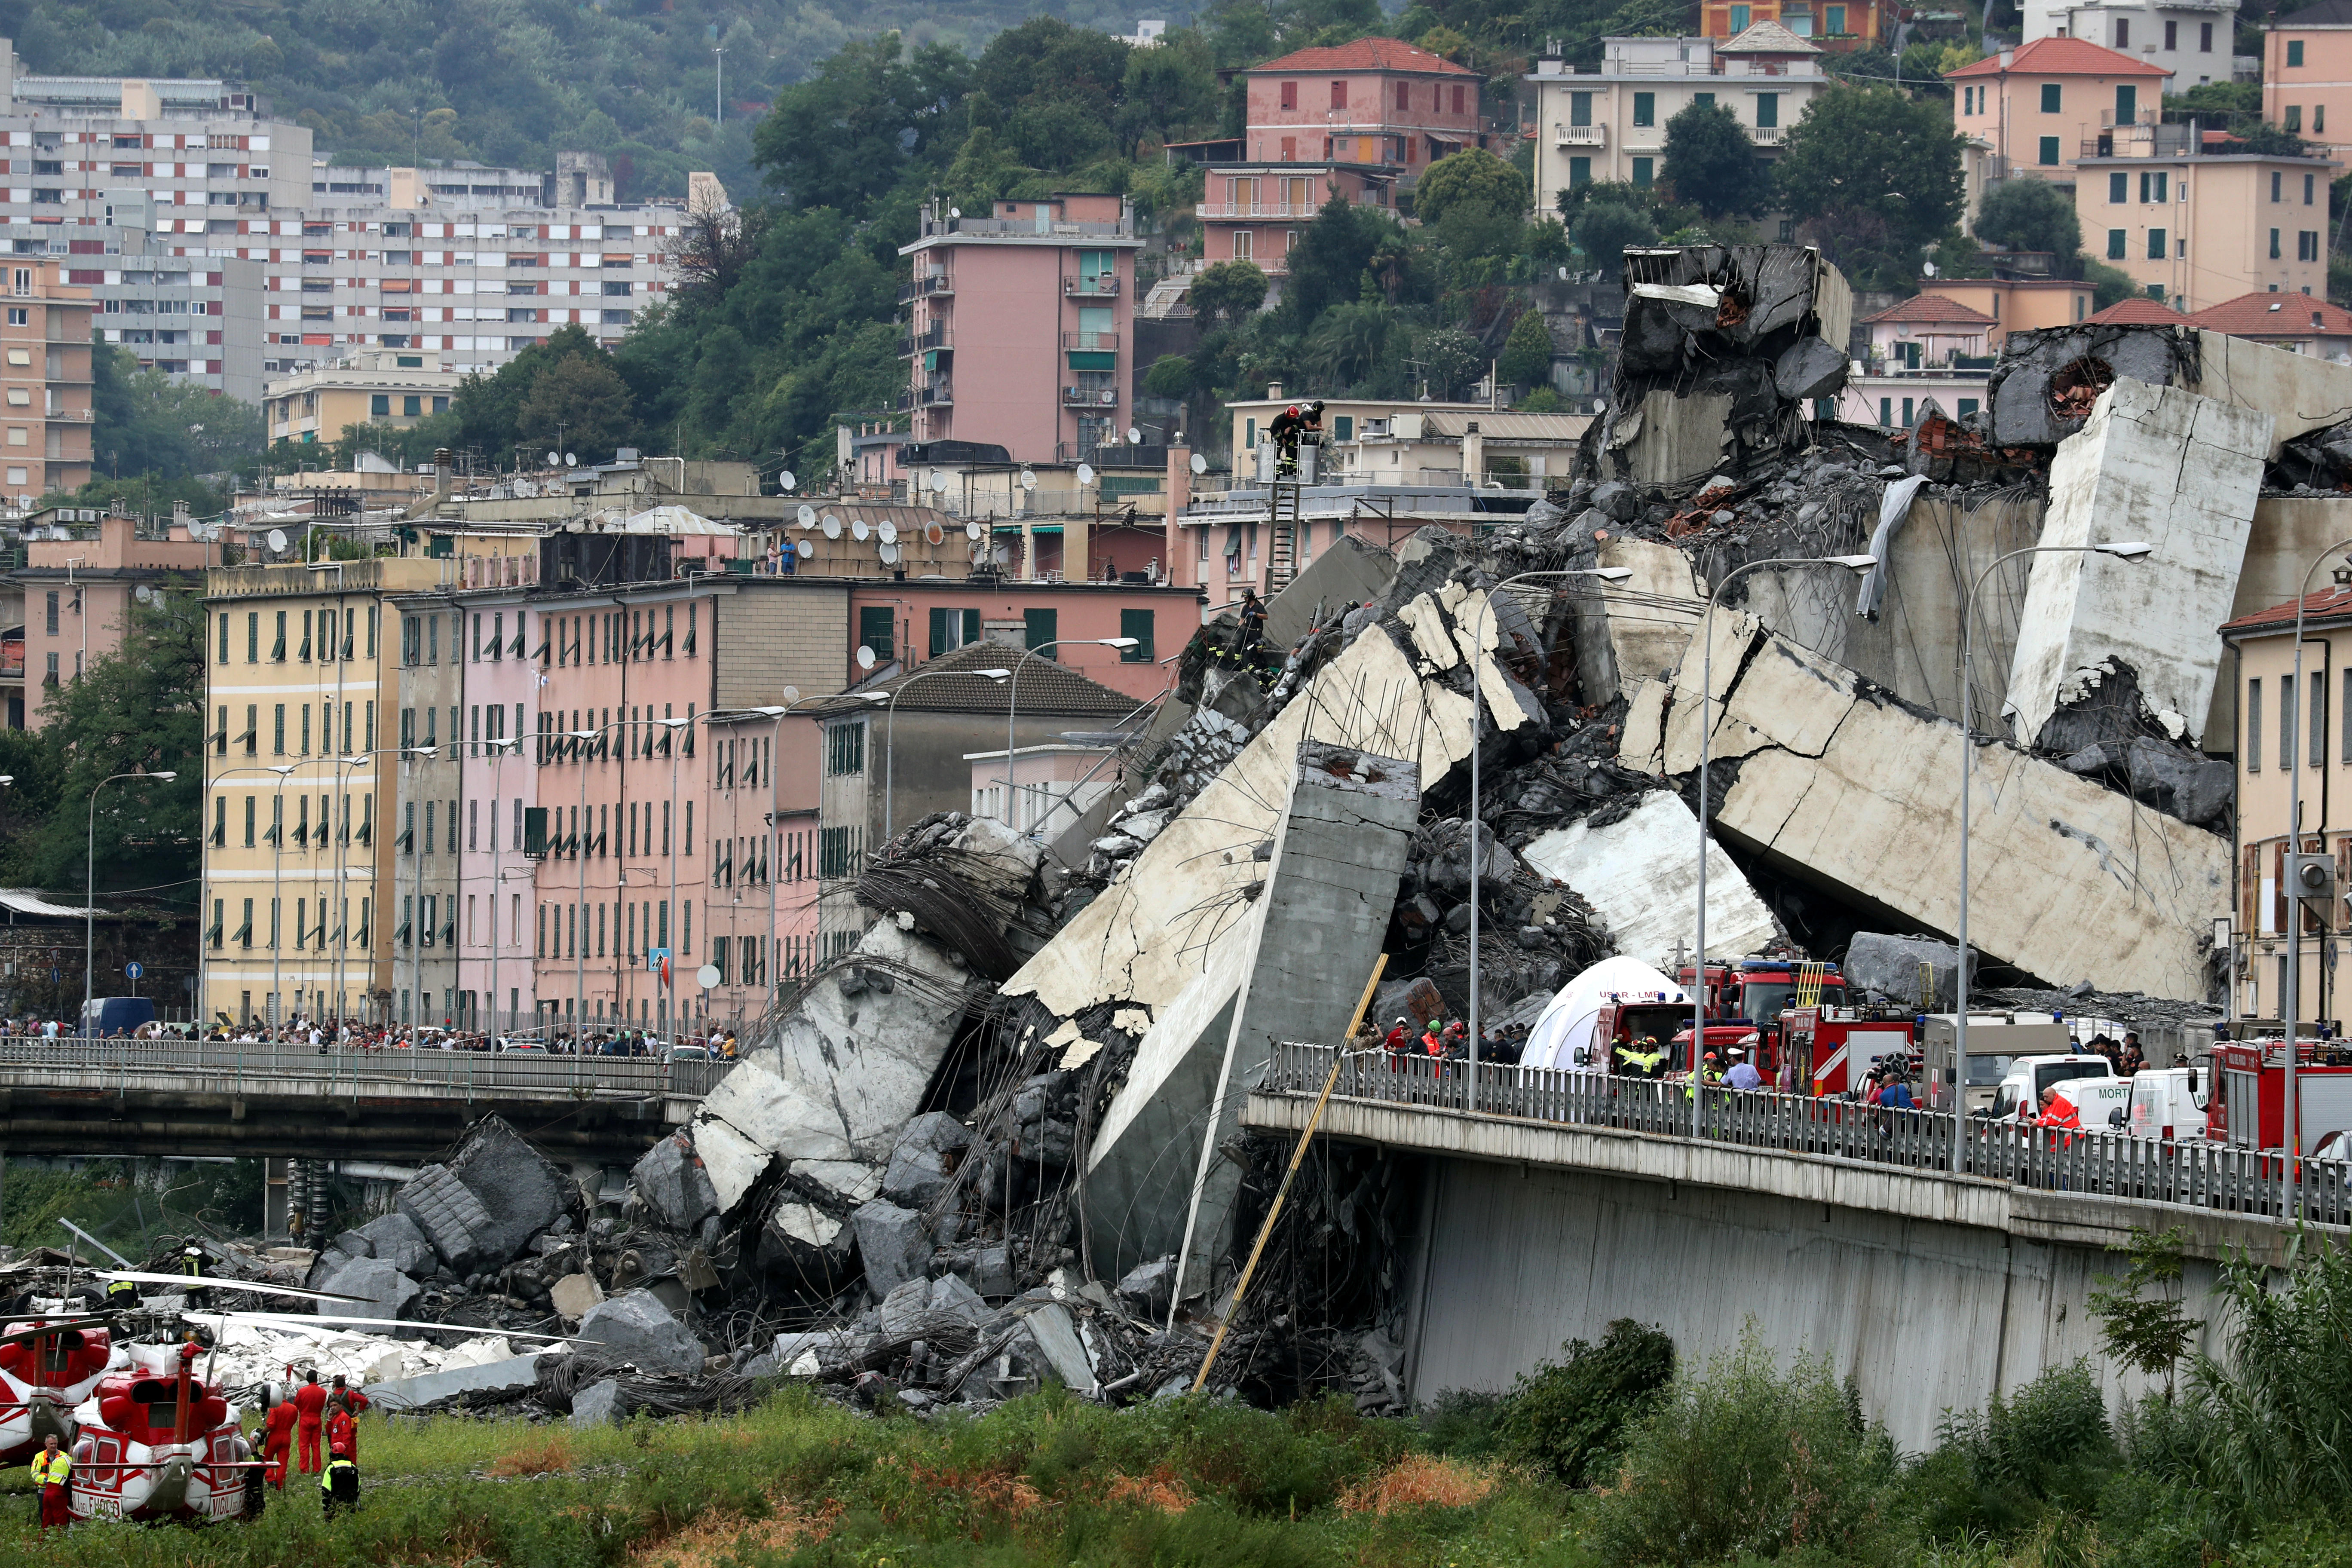 Italy Bridge Collapse In Genoa Leaves At Least 26 Dead Cars Trapped Under Rubble Today Live